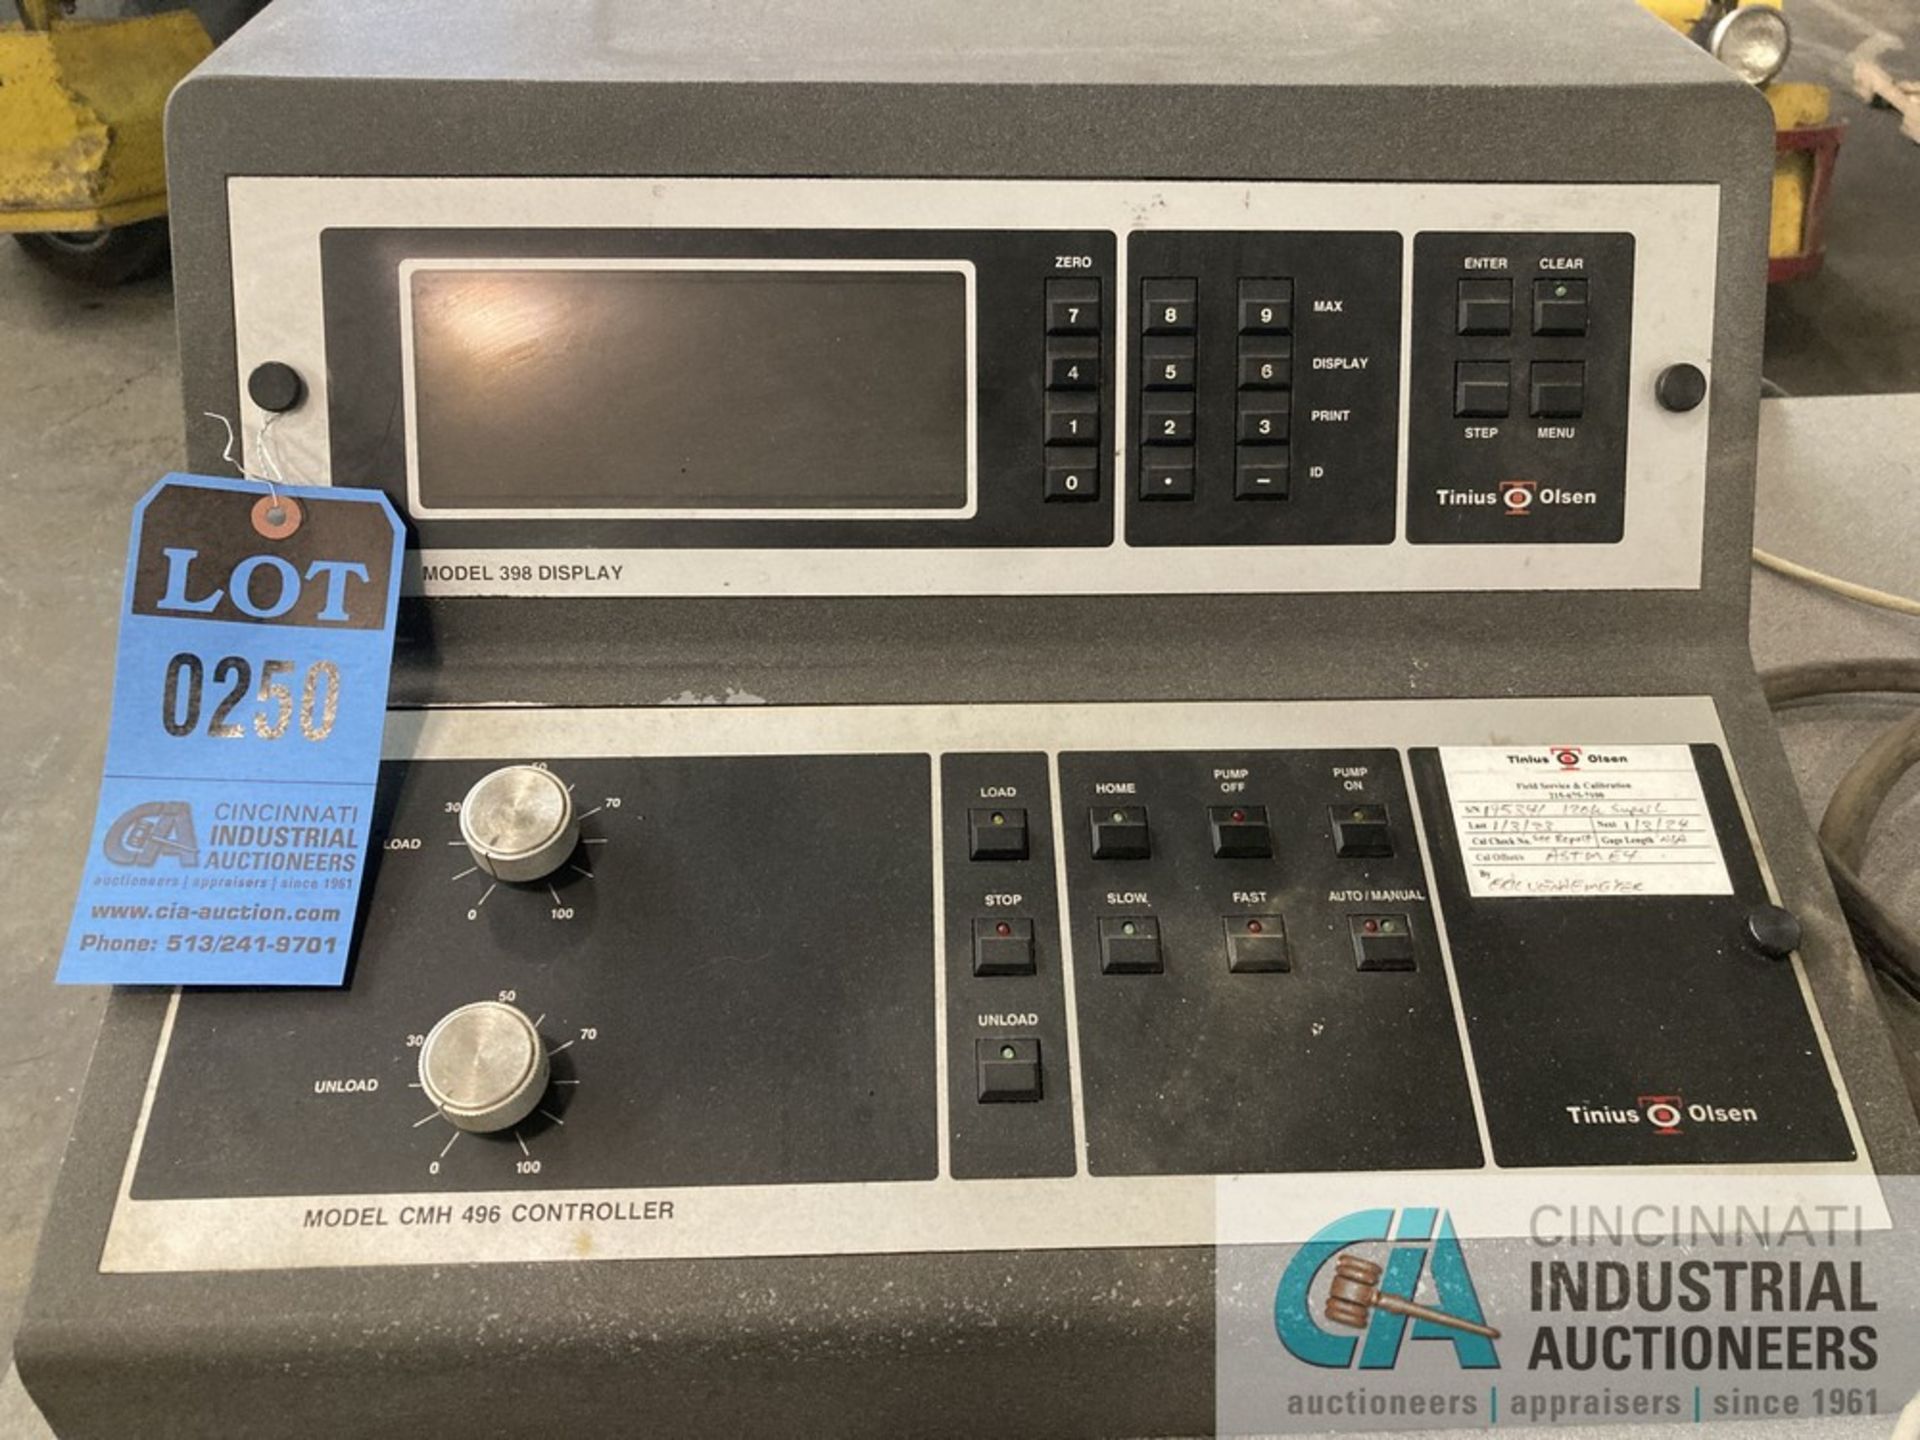 TININS OLSEN MODEL 398 TENSILE TESTER WITH CMH 496 CONTROLLER - OUT OF SERVICE - Bild 4 aus 4